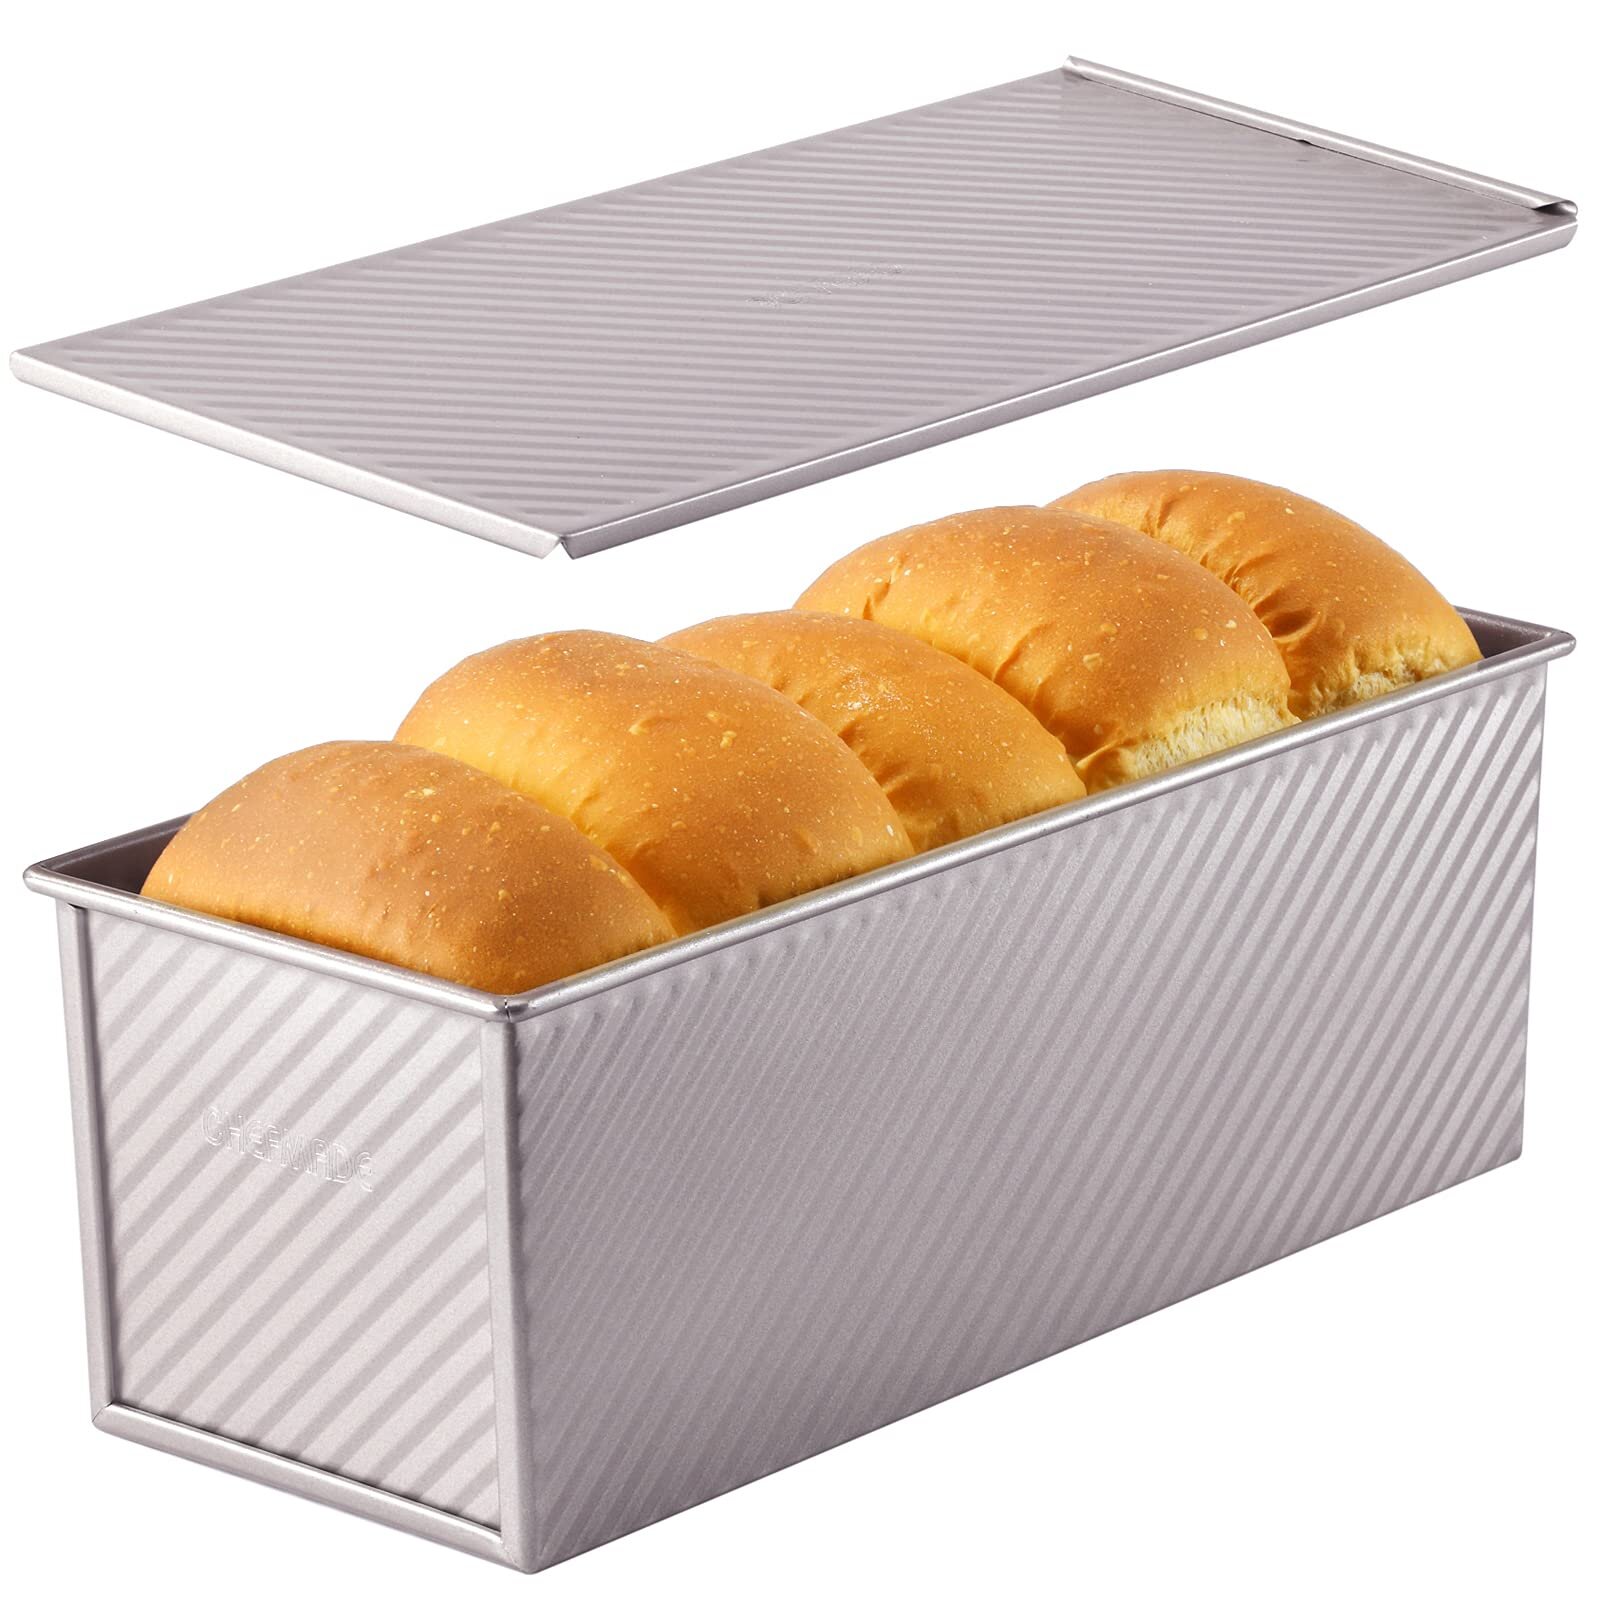 CHEFMADE Commercial Pullman Loaf Pan with Lid, 2.2lb Dough Capacity Non-Stick Rectangle Corrugated Toast Box for Oven Baking 4.8 x 12.8x 4.7 CHEFMA